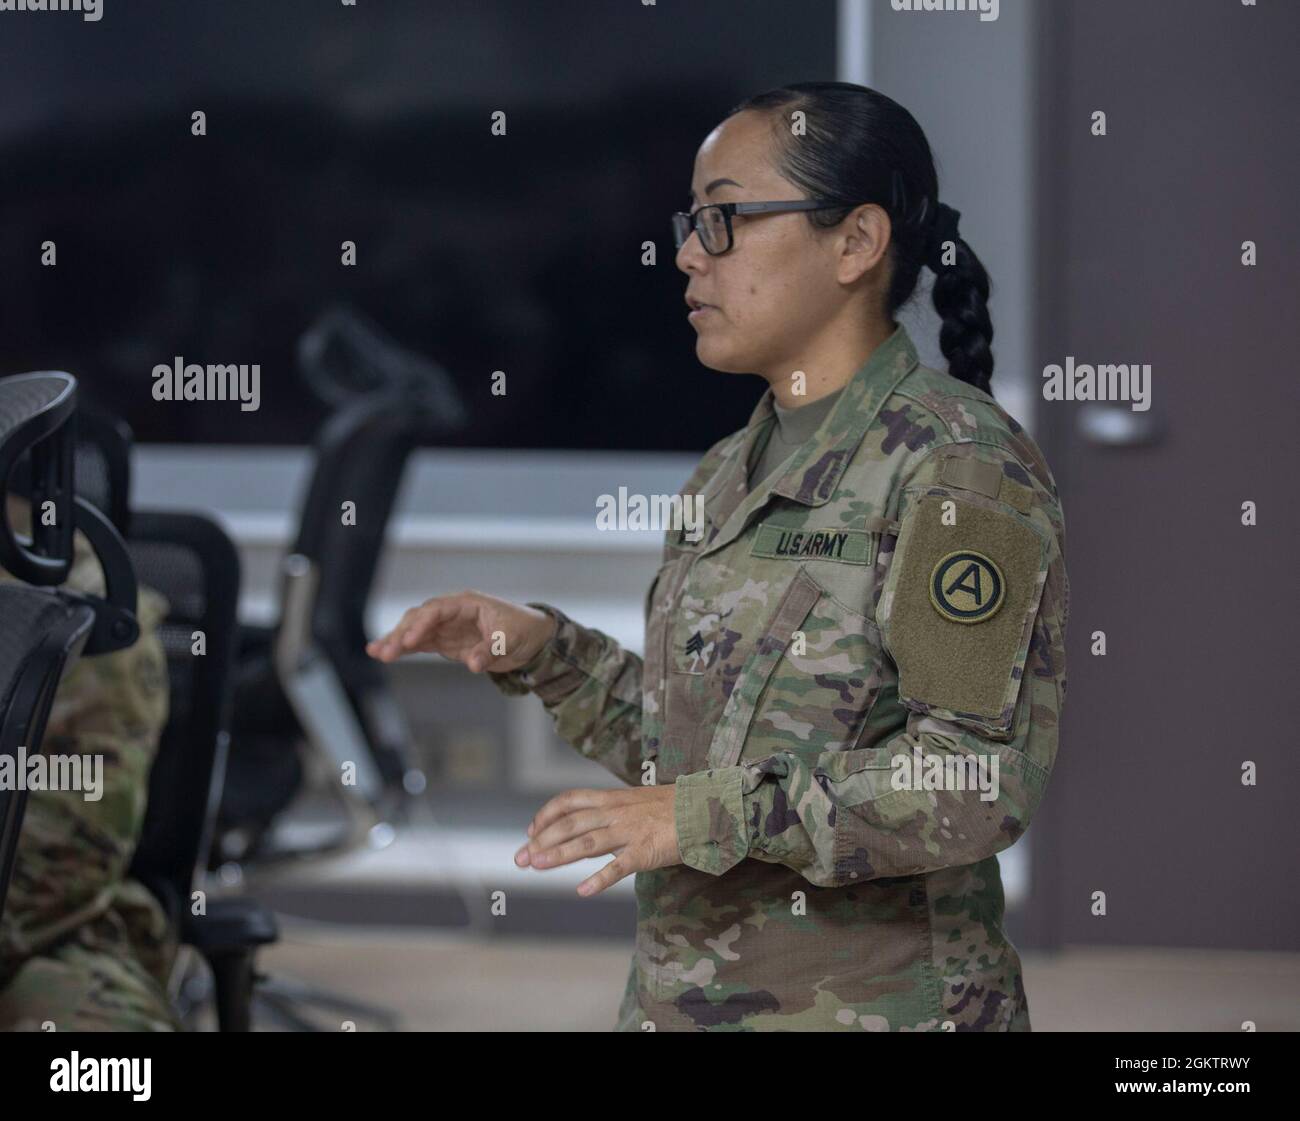 Army Sgt. Aleeya Vang, with Area Support Group - Kuwait provides instructions on the Noncombatant Evacuation Operations Tracking System at Camp Arifjan, Kuwait, July 1, 2021. The NTS provides accountability of evacuees by enabling operators to maintain a database of information for each evacuee as they enter, proceed through, and finally exit the evacuation process at a reception site or other exit point. Stock Photo